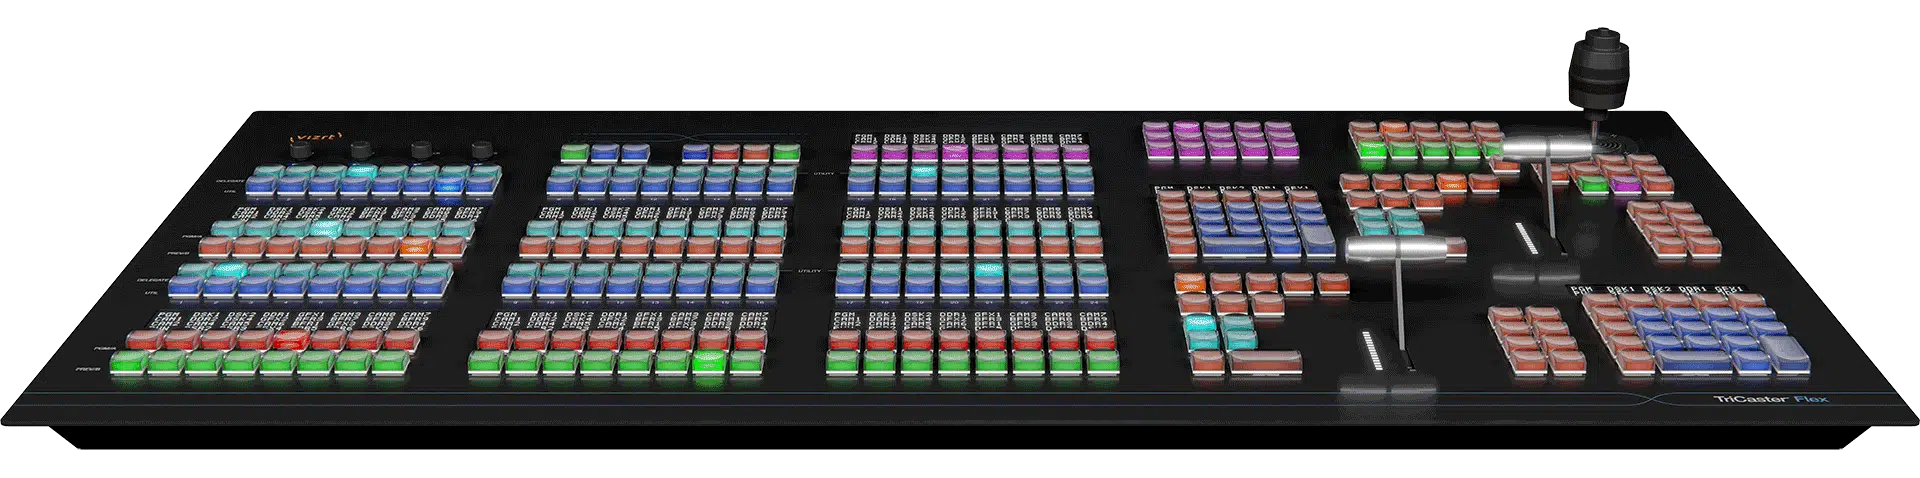 TriCaster Flex Control Panel all look